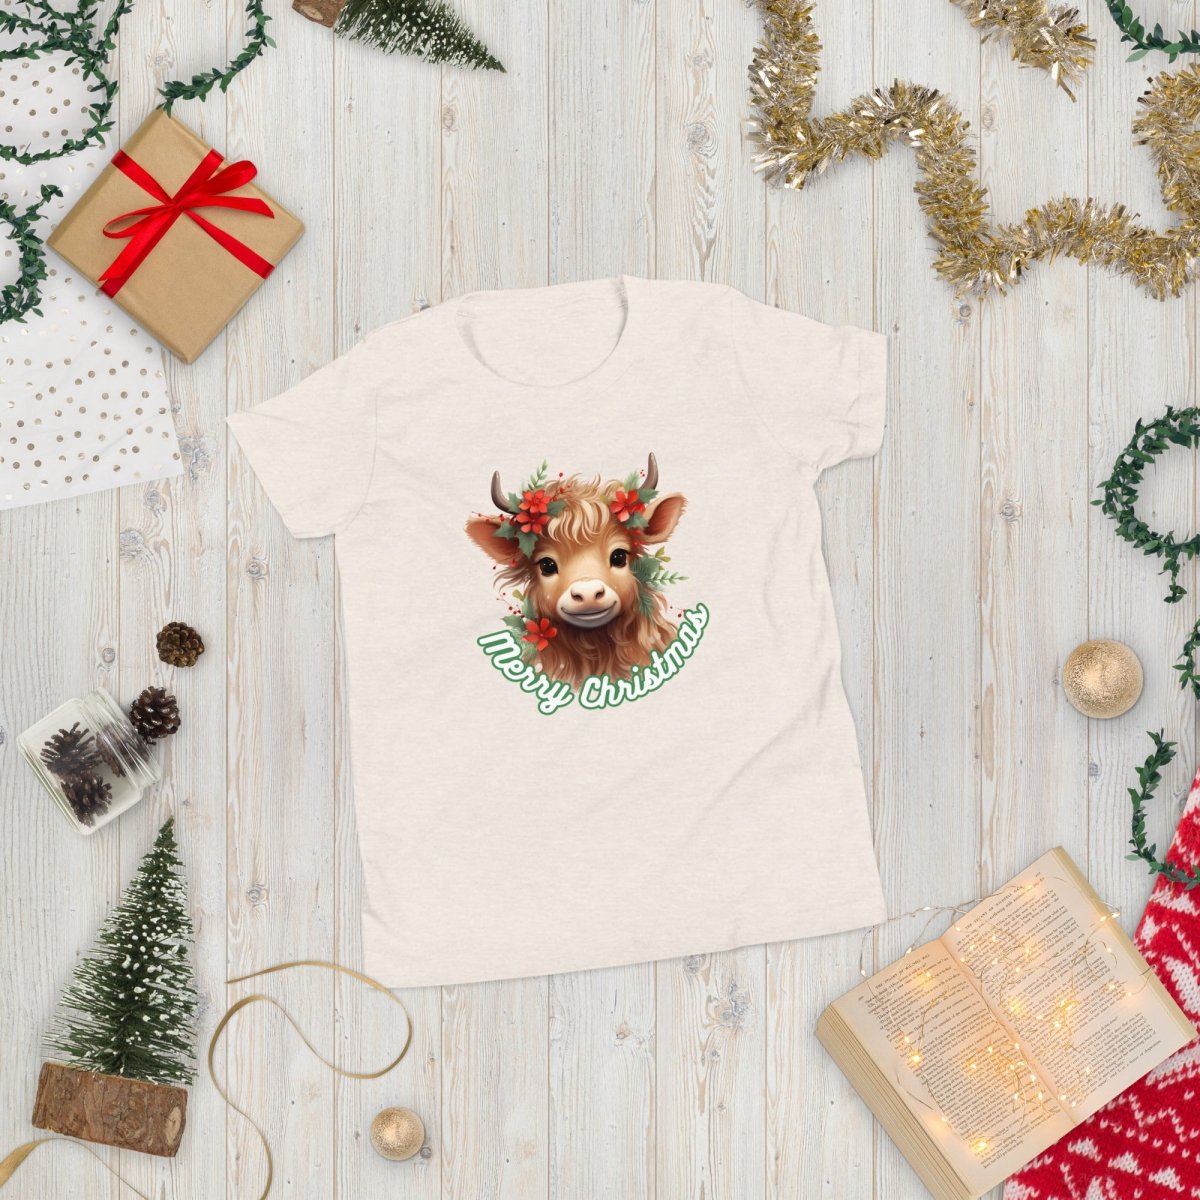 Christmas Highland Cow T-Shirt - High Quality Festive Family Teenager T-Shirt, Gift for Cow Lovers, Cute Christmas Shirt, Youth Xmas Tee - Everything Pixel